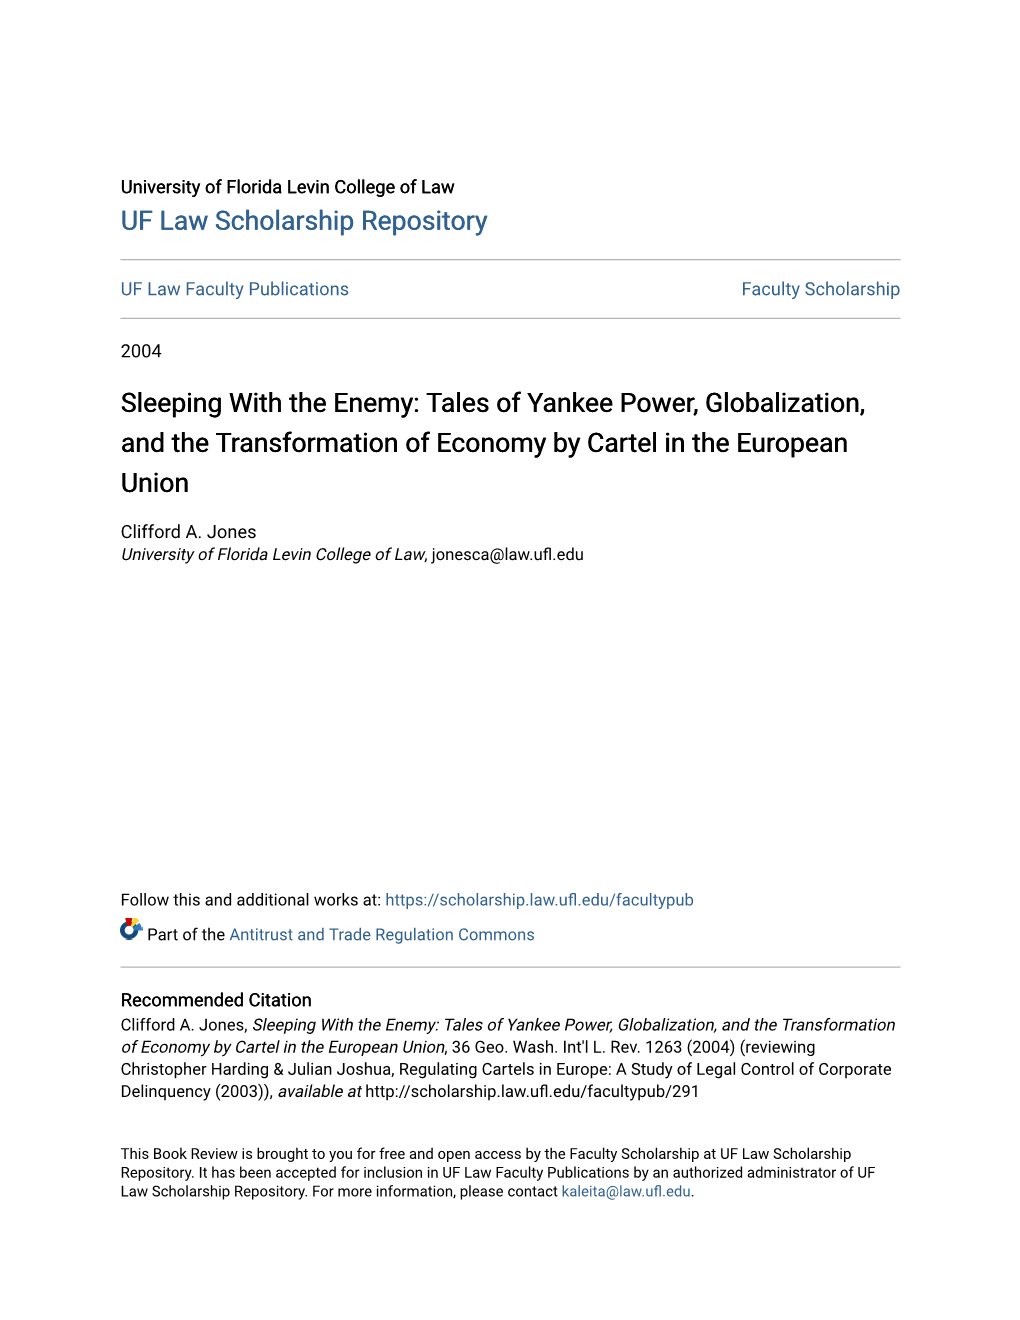 Tales of Yankee Power, Globalization, and the Transformation of Economy by Cartel in the European Union